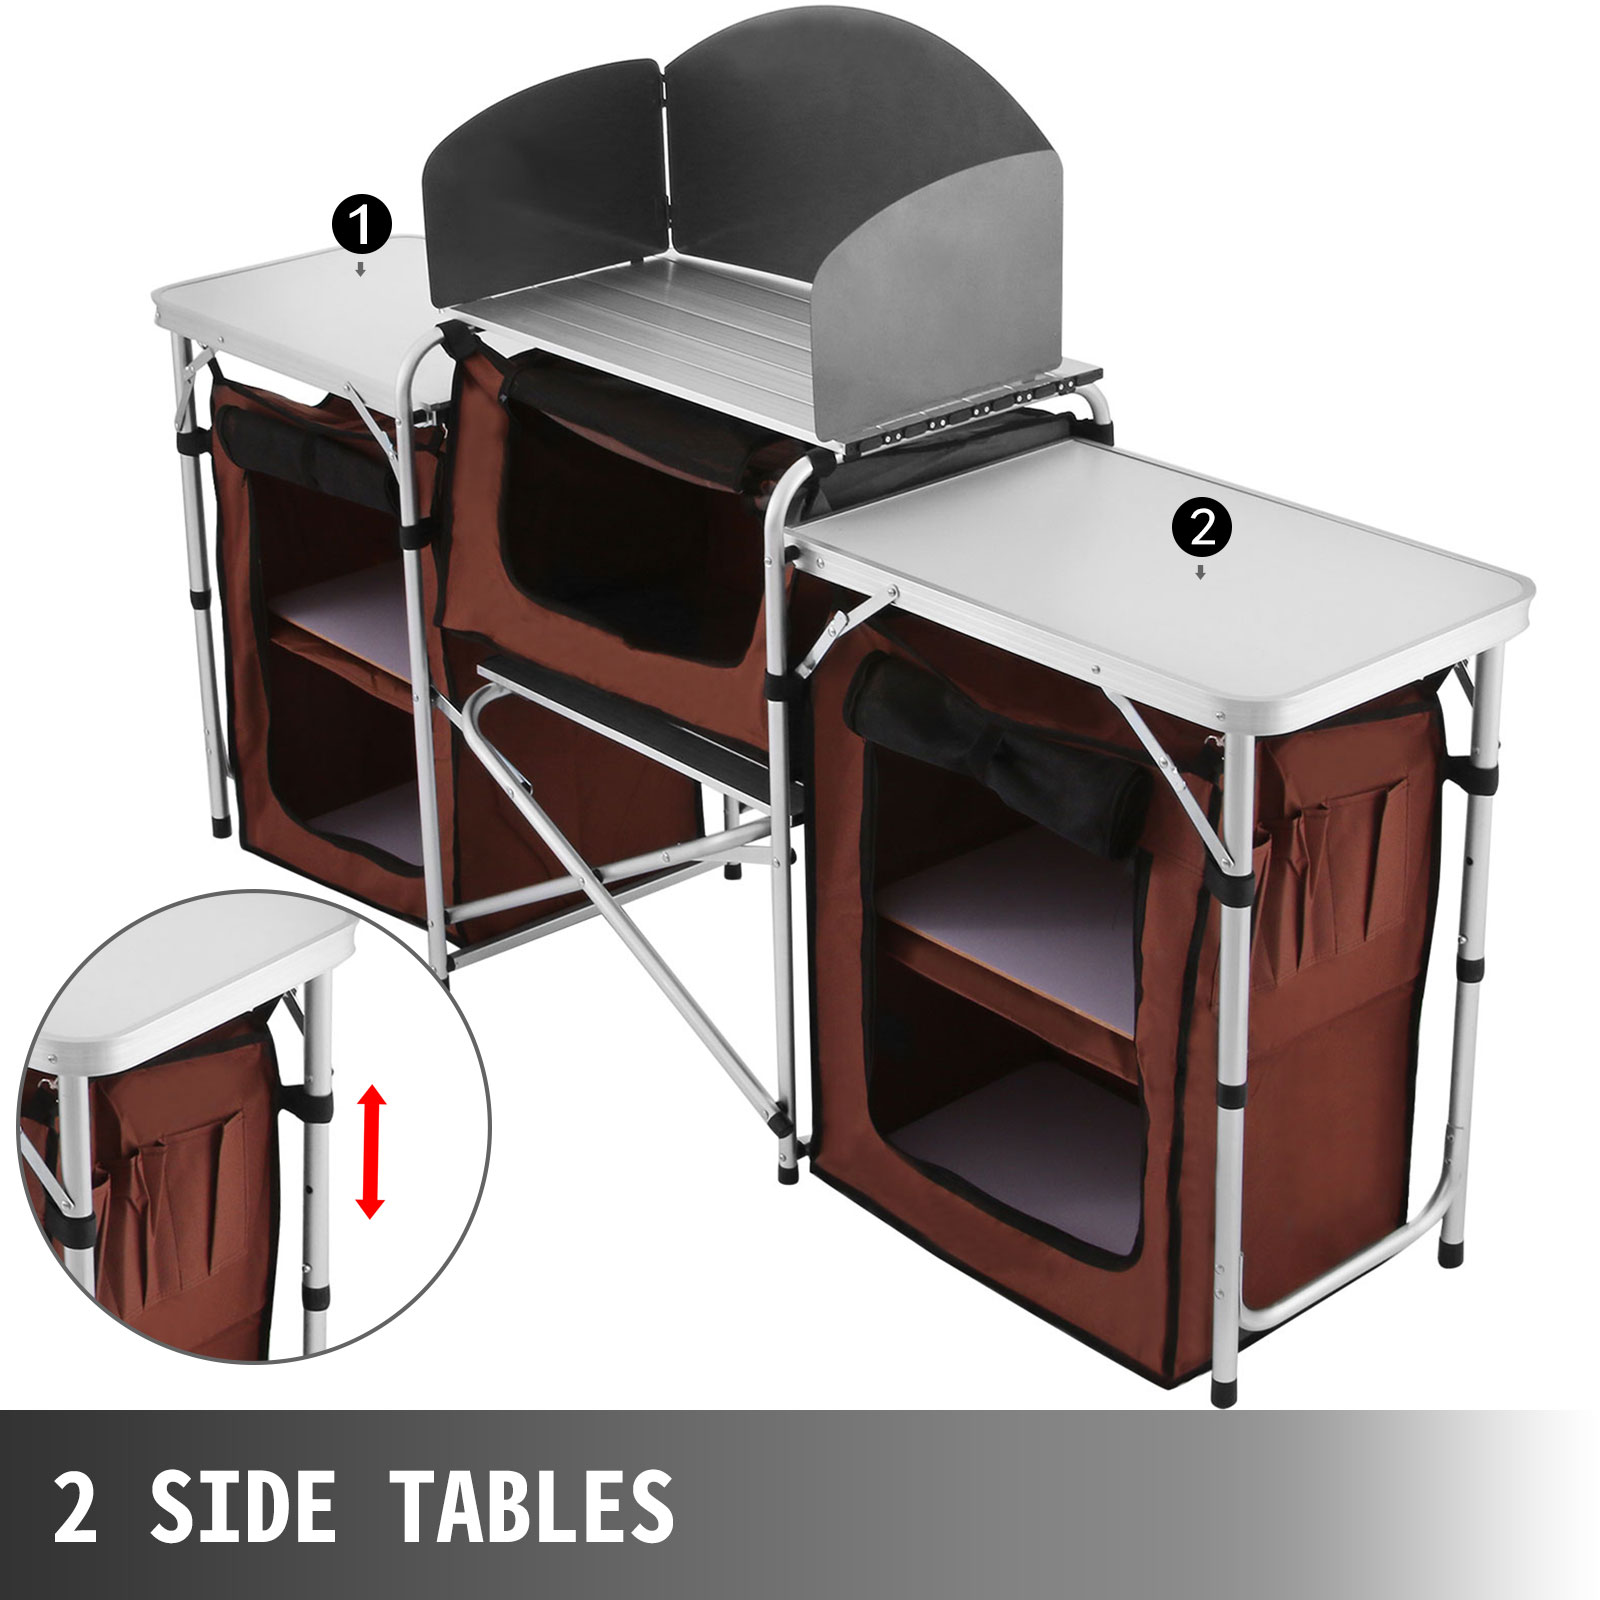 Camping Kitchen Stand Portable Cooking Cabinet Storage Unit Windshield Outdoor Ebay